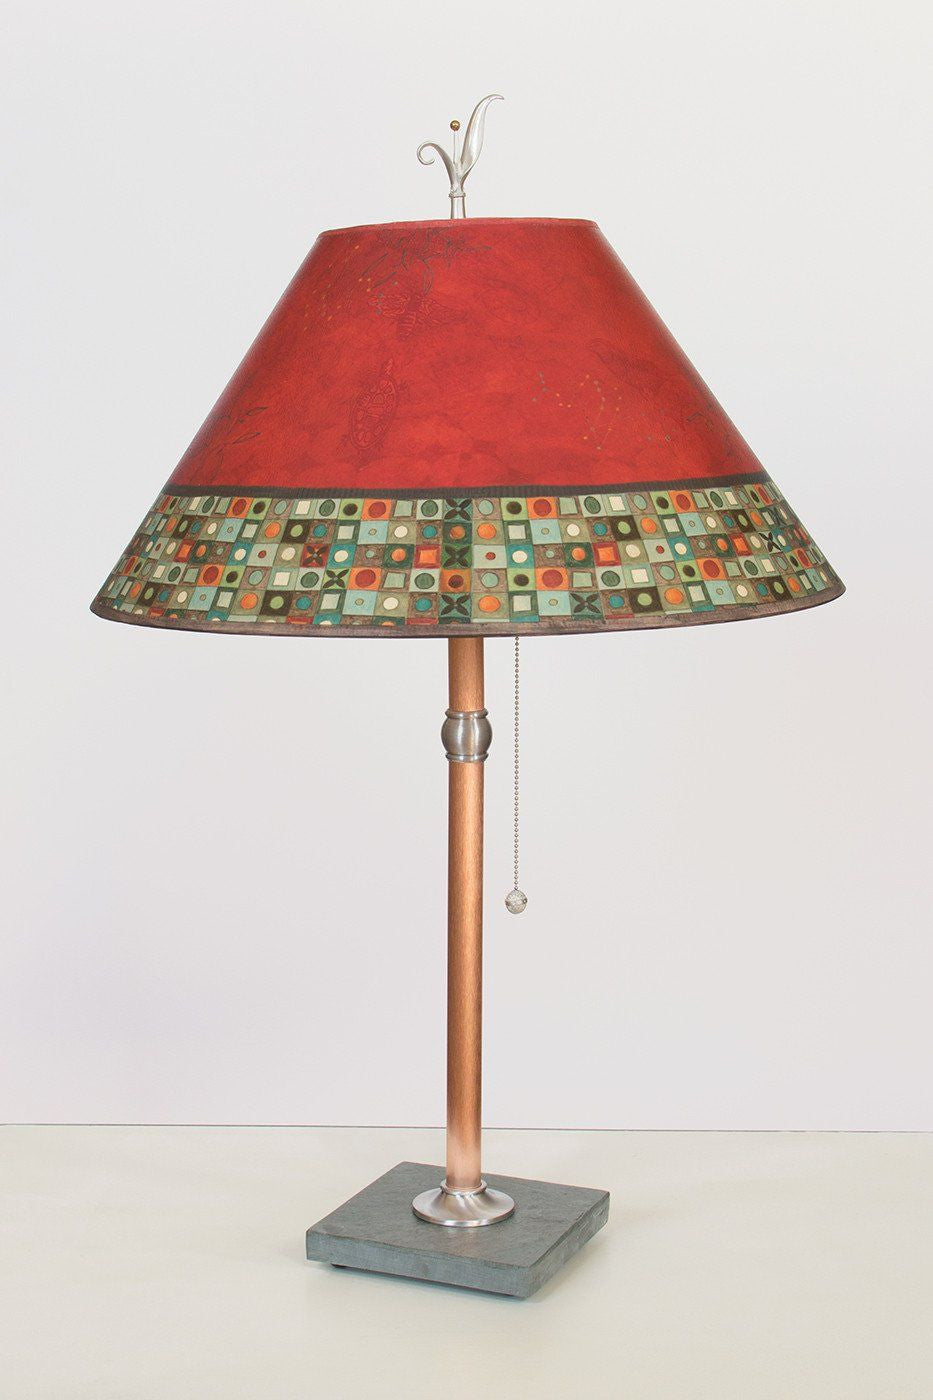 Copper Table Lamp on Vermont Slate with Large Conical Shade in Red Mosaic